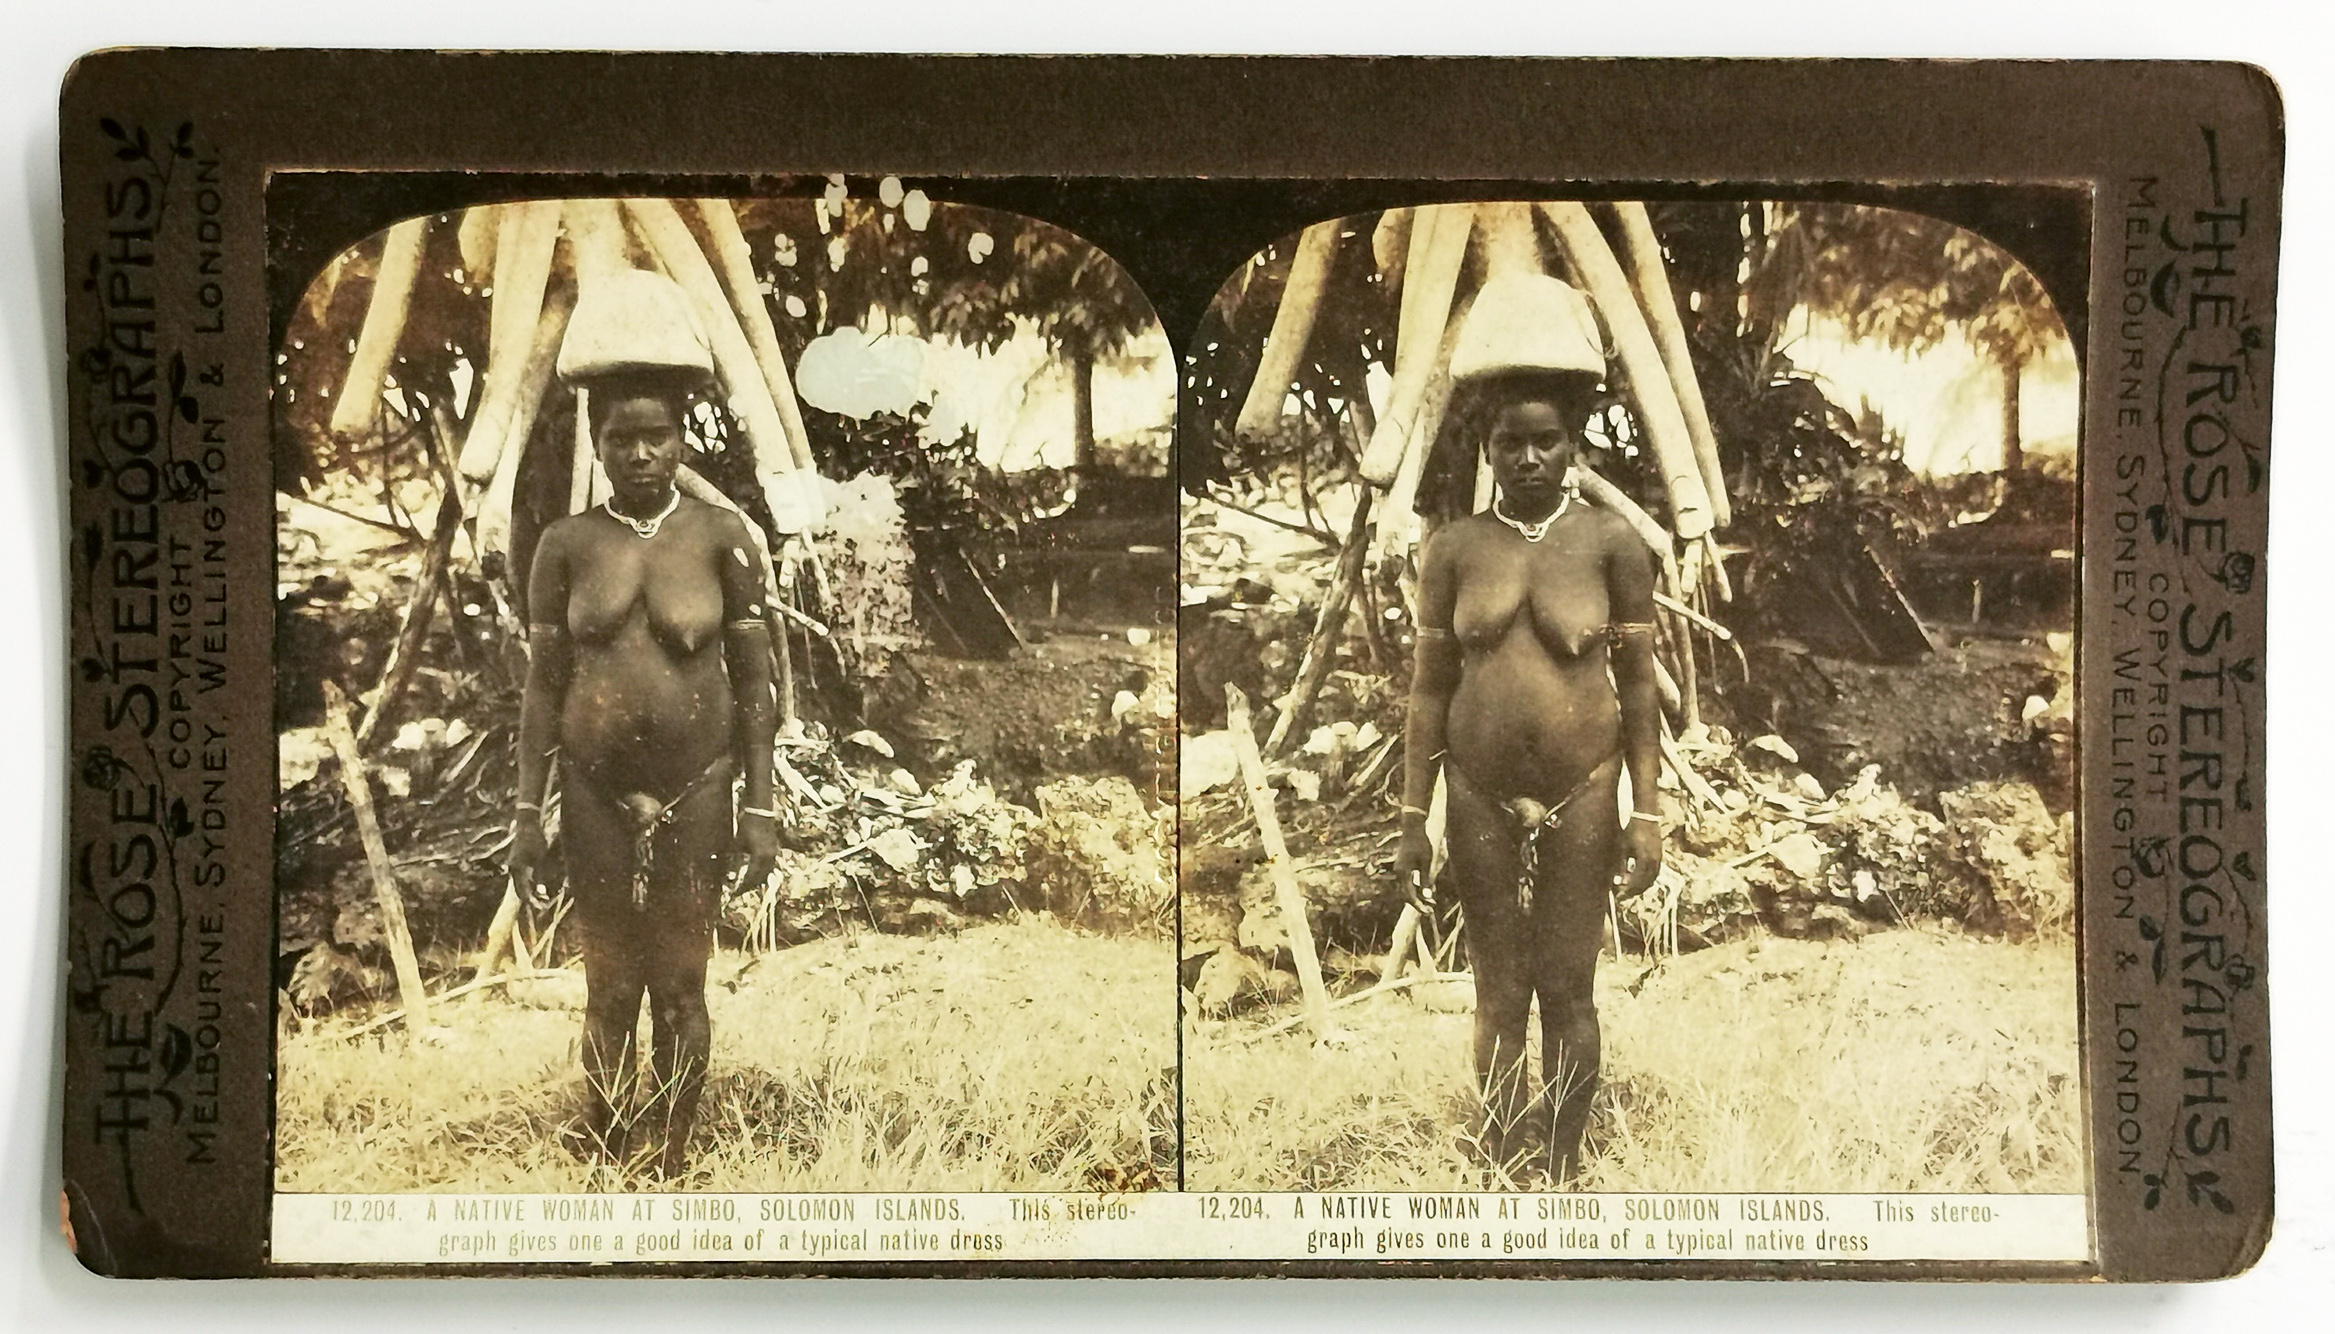 A Native Woman at Simbo, Solomon Islands. - Antique Photograph from 1905